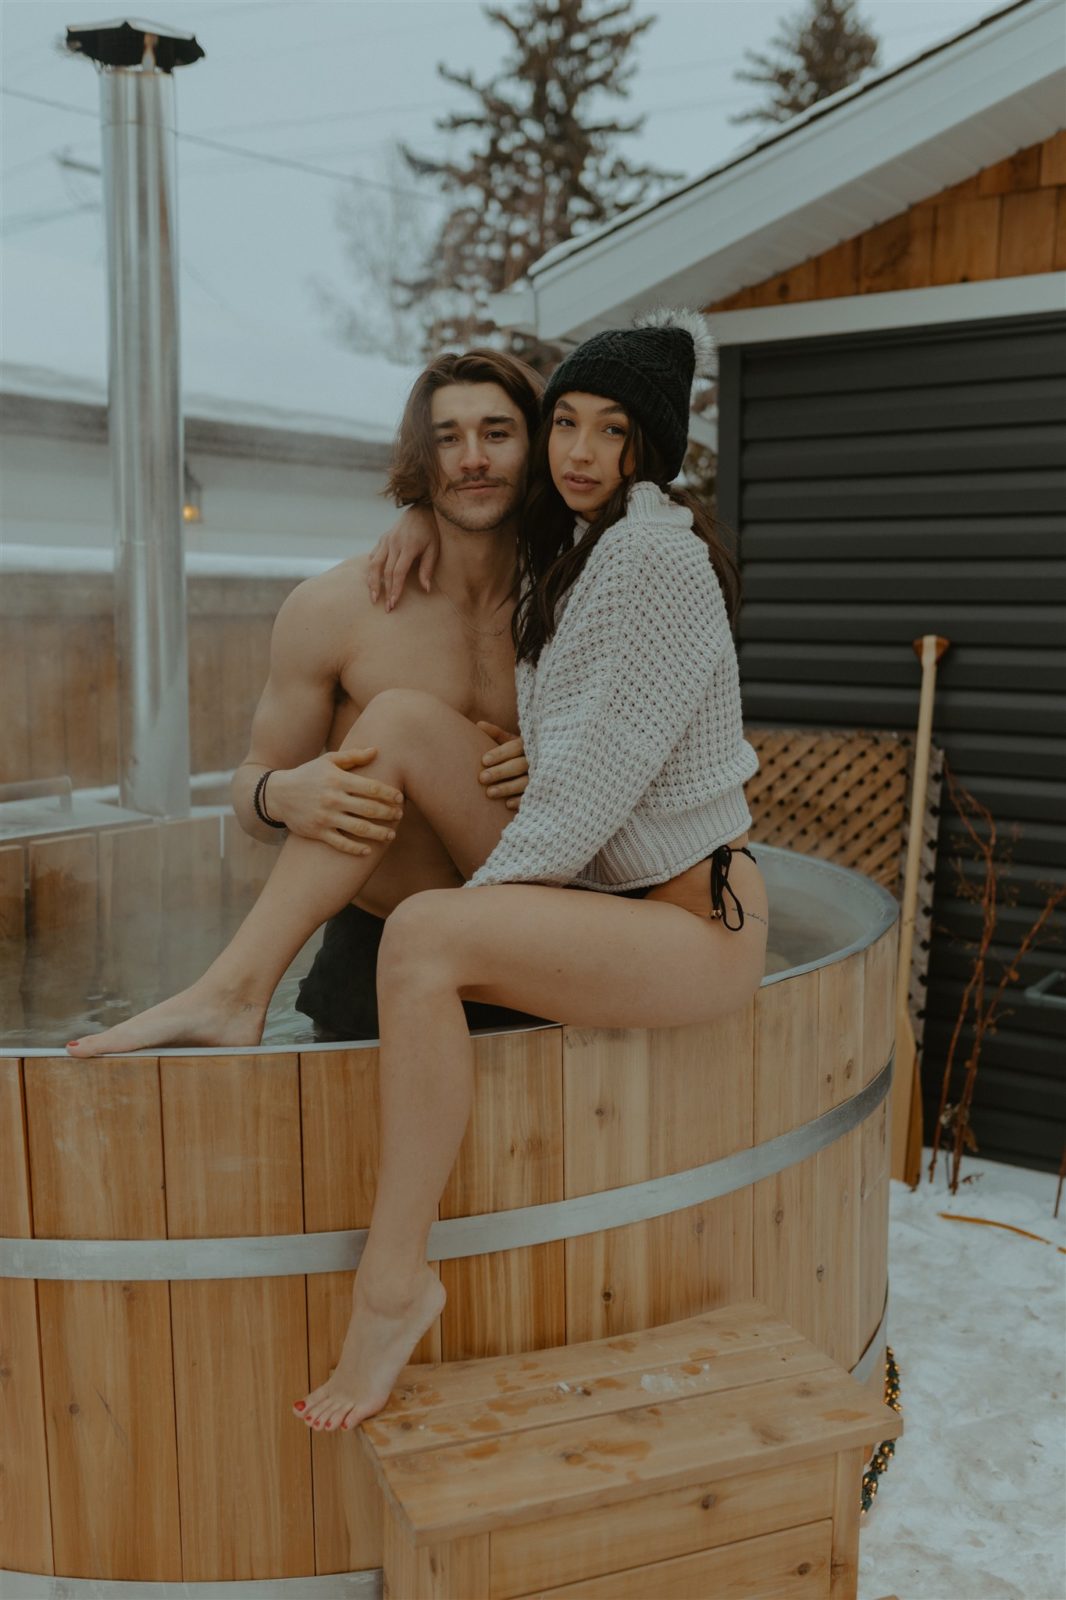 Couple photo session in hot tub during Alberta winter, ways to stay warm during your engagement session